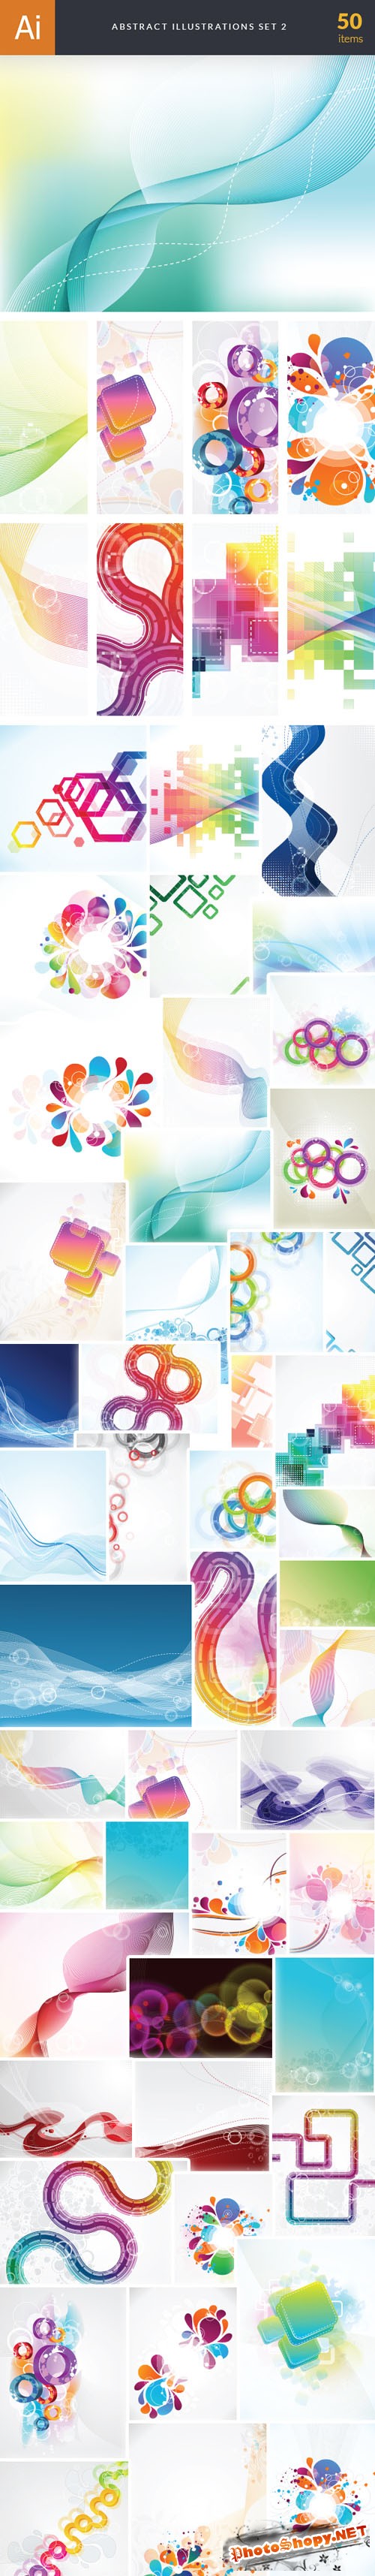 50 Abstract Vector Illustrations Bundle